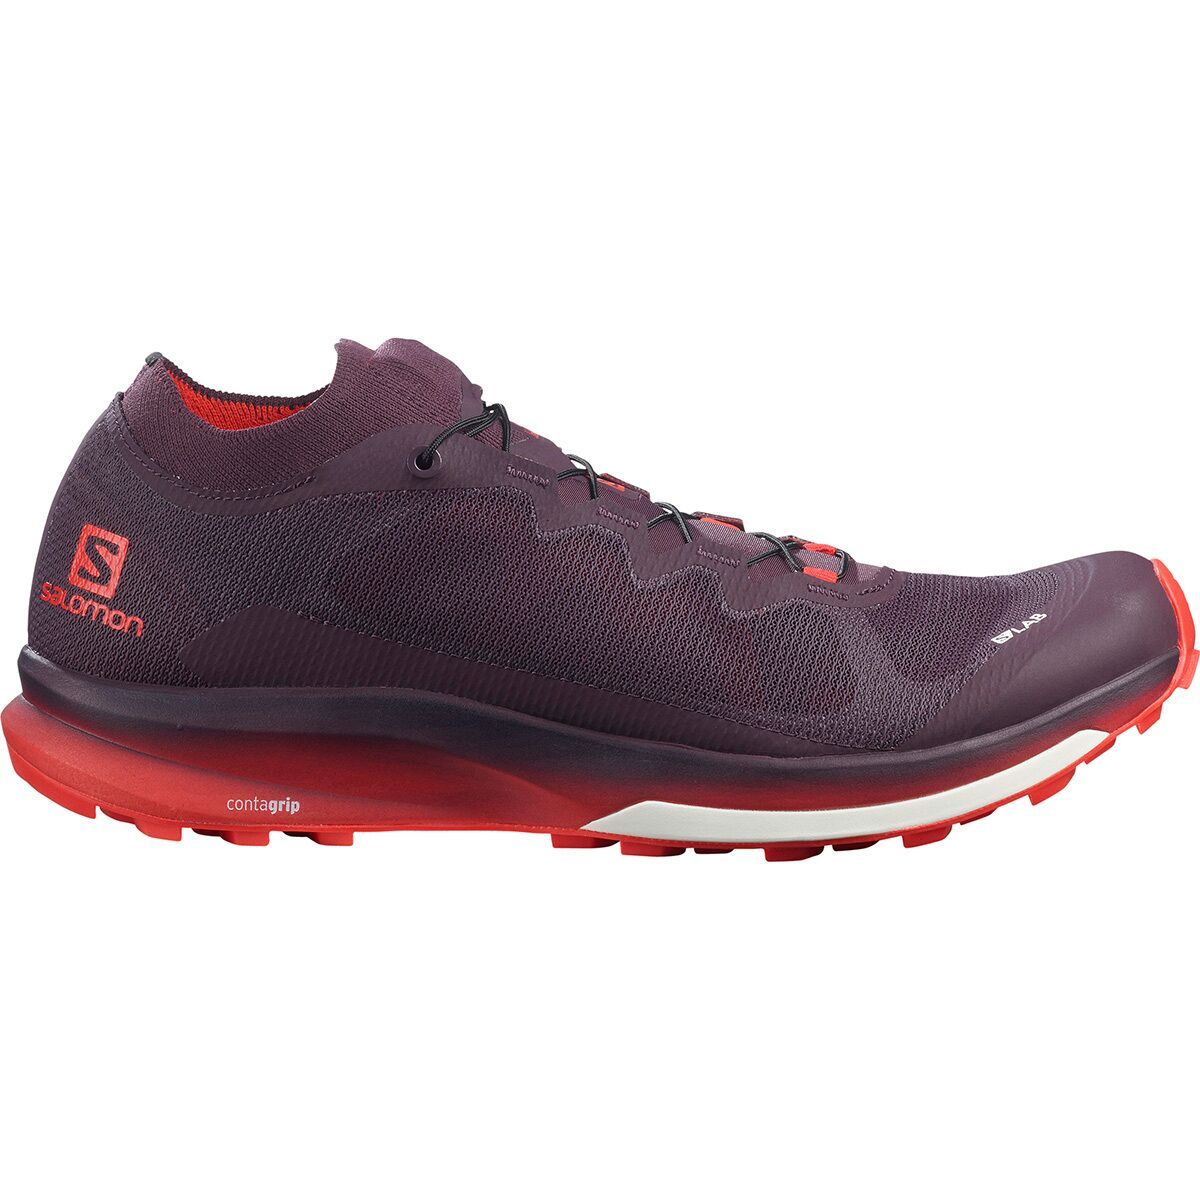 stability trail running shoes